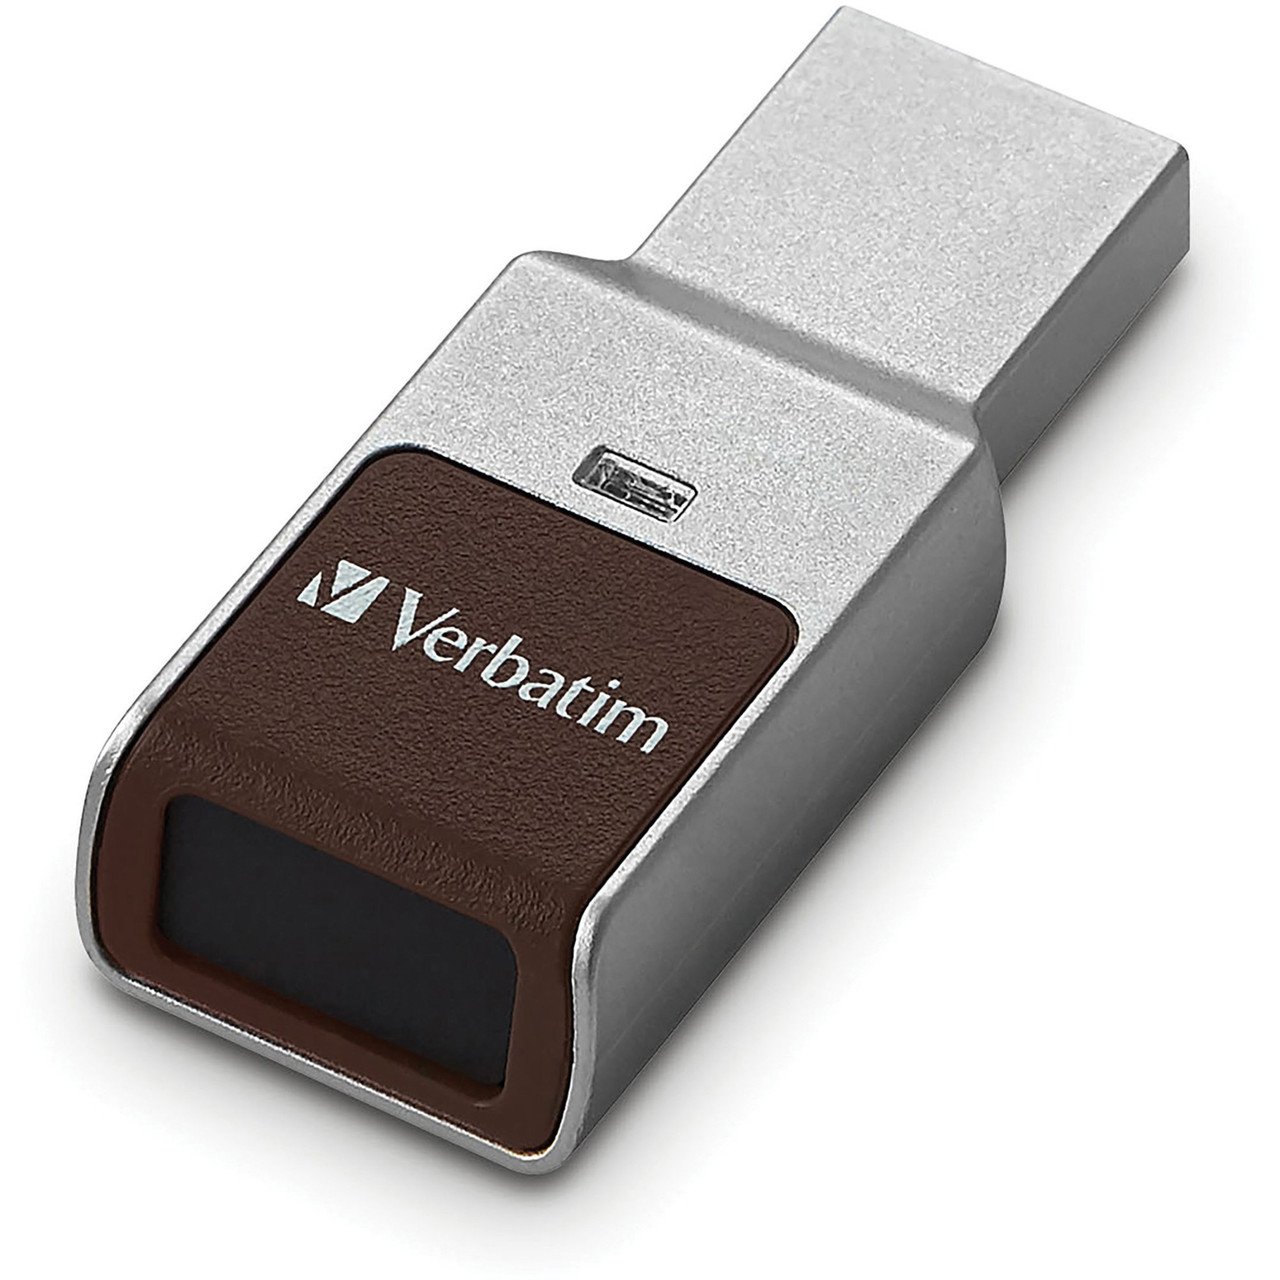 32GB Fingerprint Secure USB 3.0 Flash Drive with AES 256 Hardware Encryption - Silver - 70367